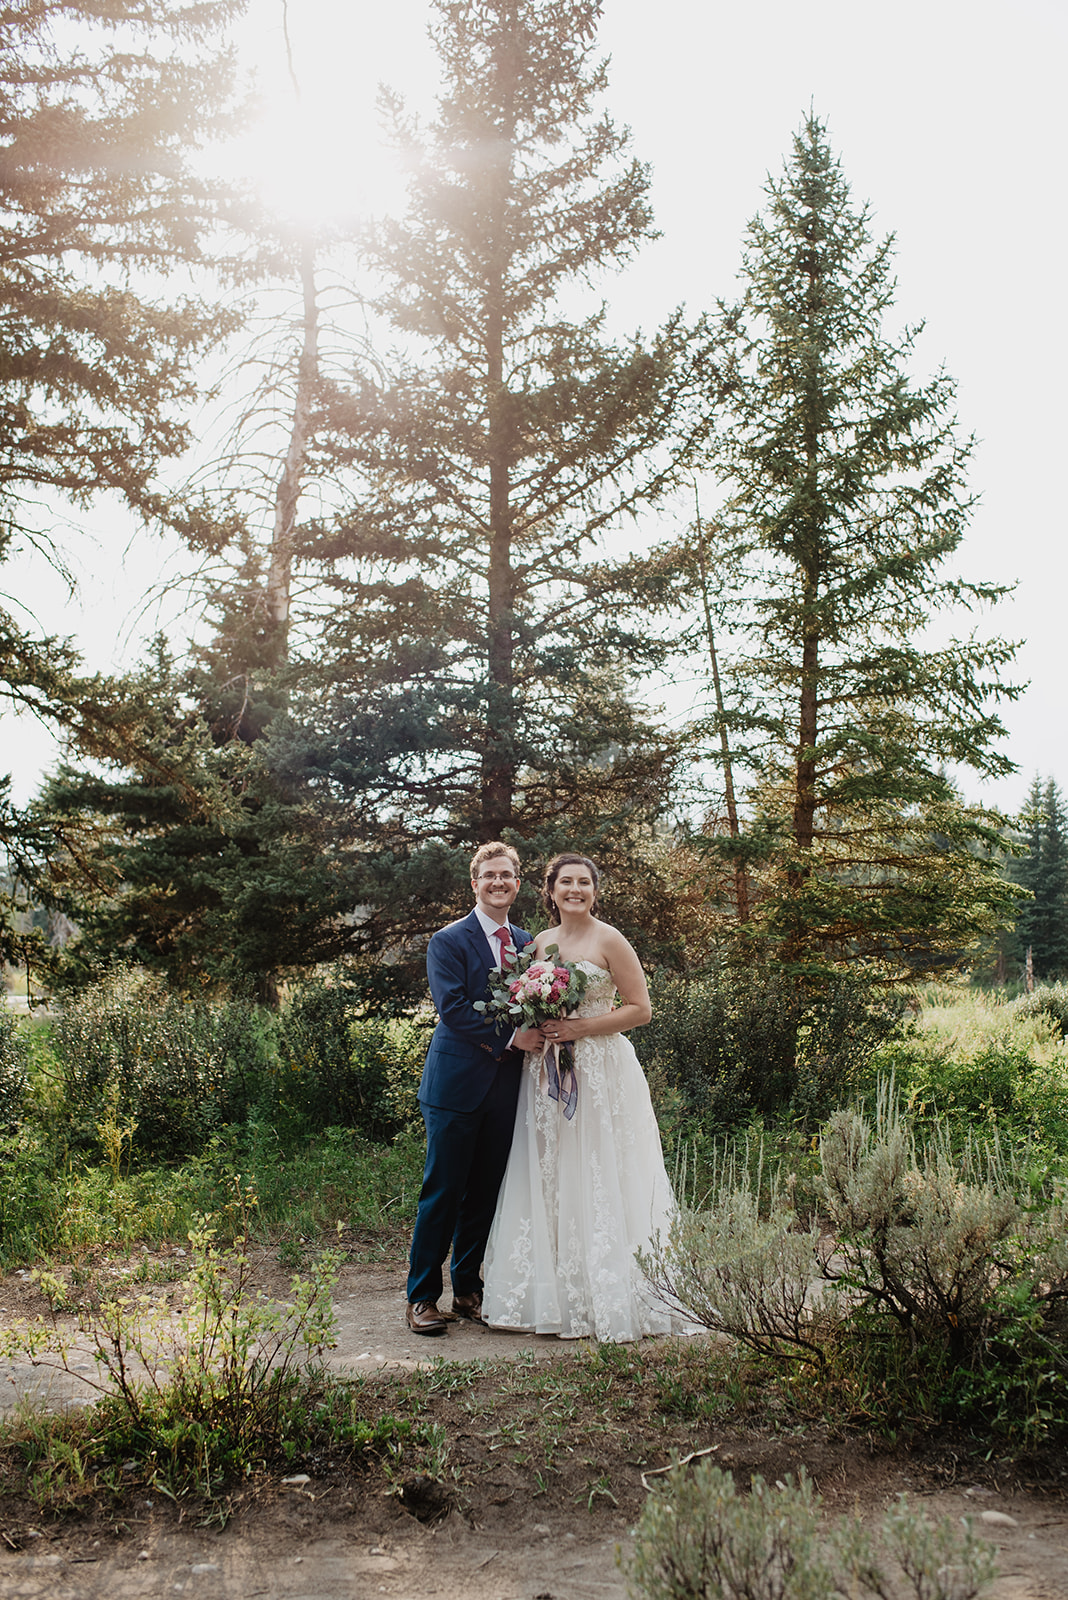 adventurous couple in the forest of the Grand Tetons on their elopement day standning side by side and smiling as the bride holds her florals and the sun shines behind them